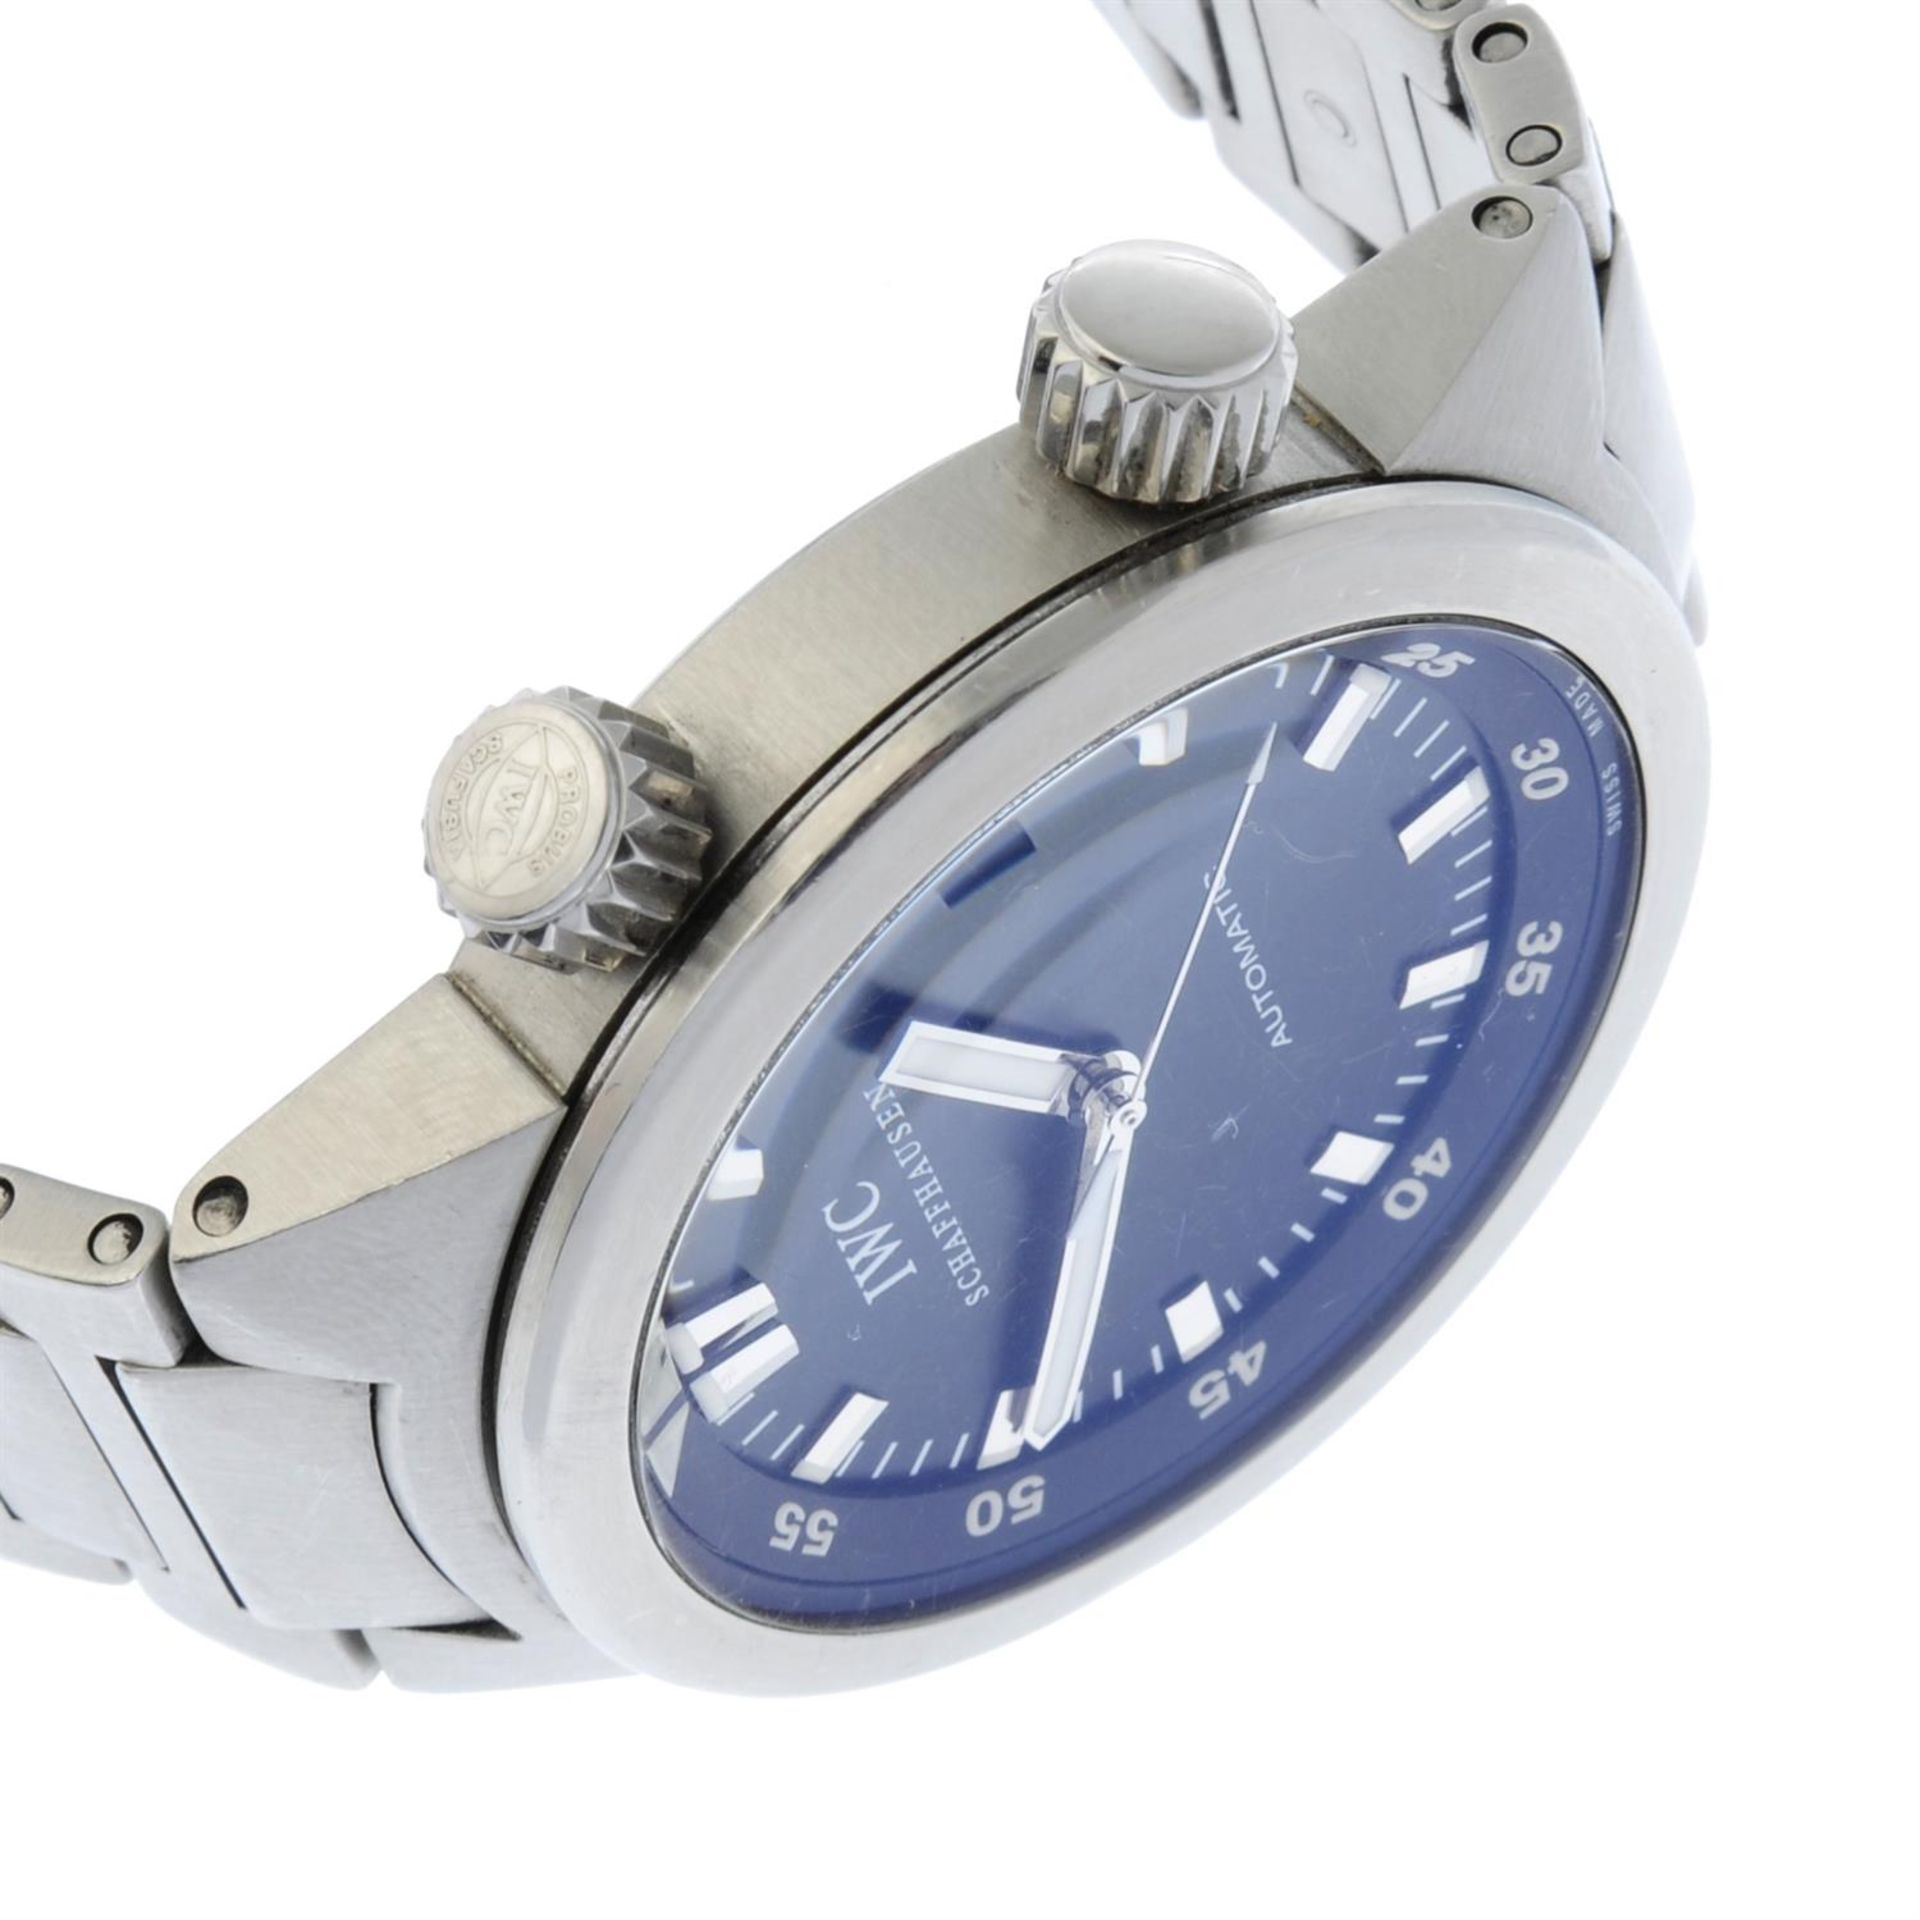 IWC - a stainless steel Aquatimer bracelet watch, 42mm. - Image 3 of 5